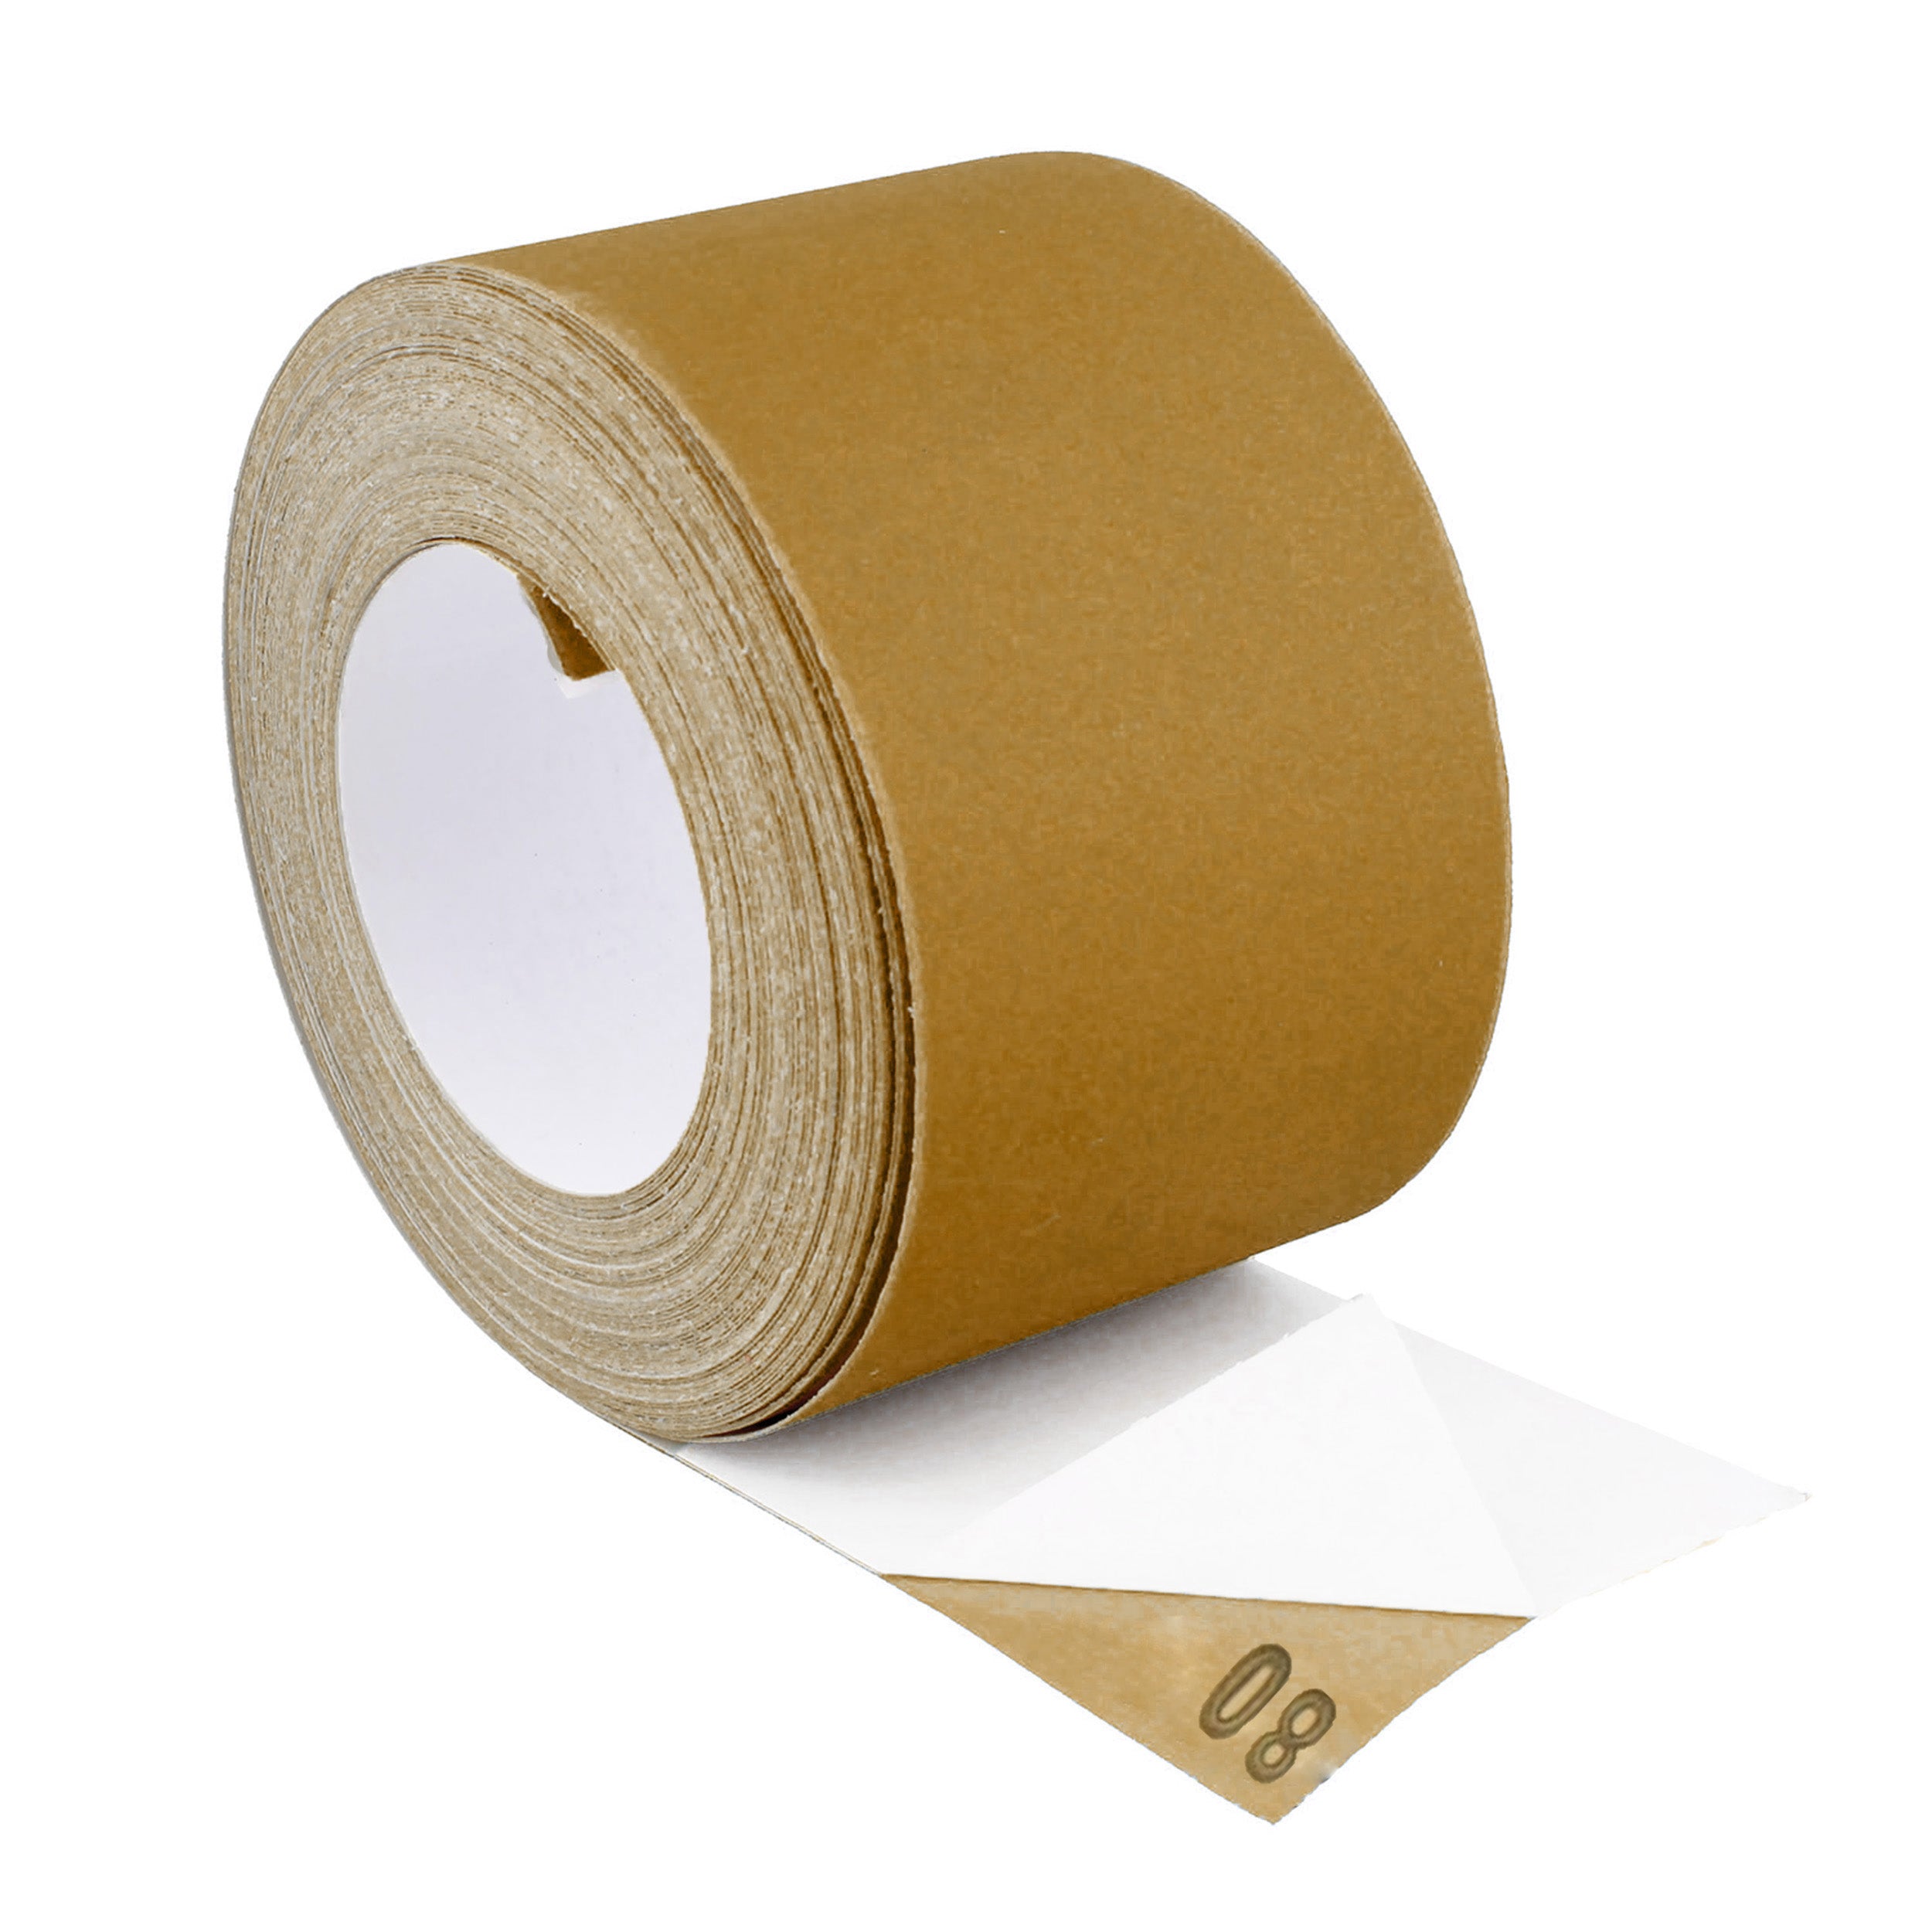 Adhesive 80-Grit Aluminum Oxide Sandpaper Roll 2-3/4” Inch x 20 Yards